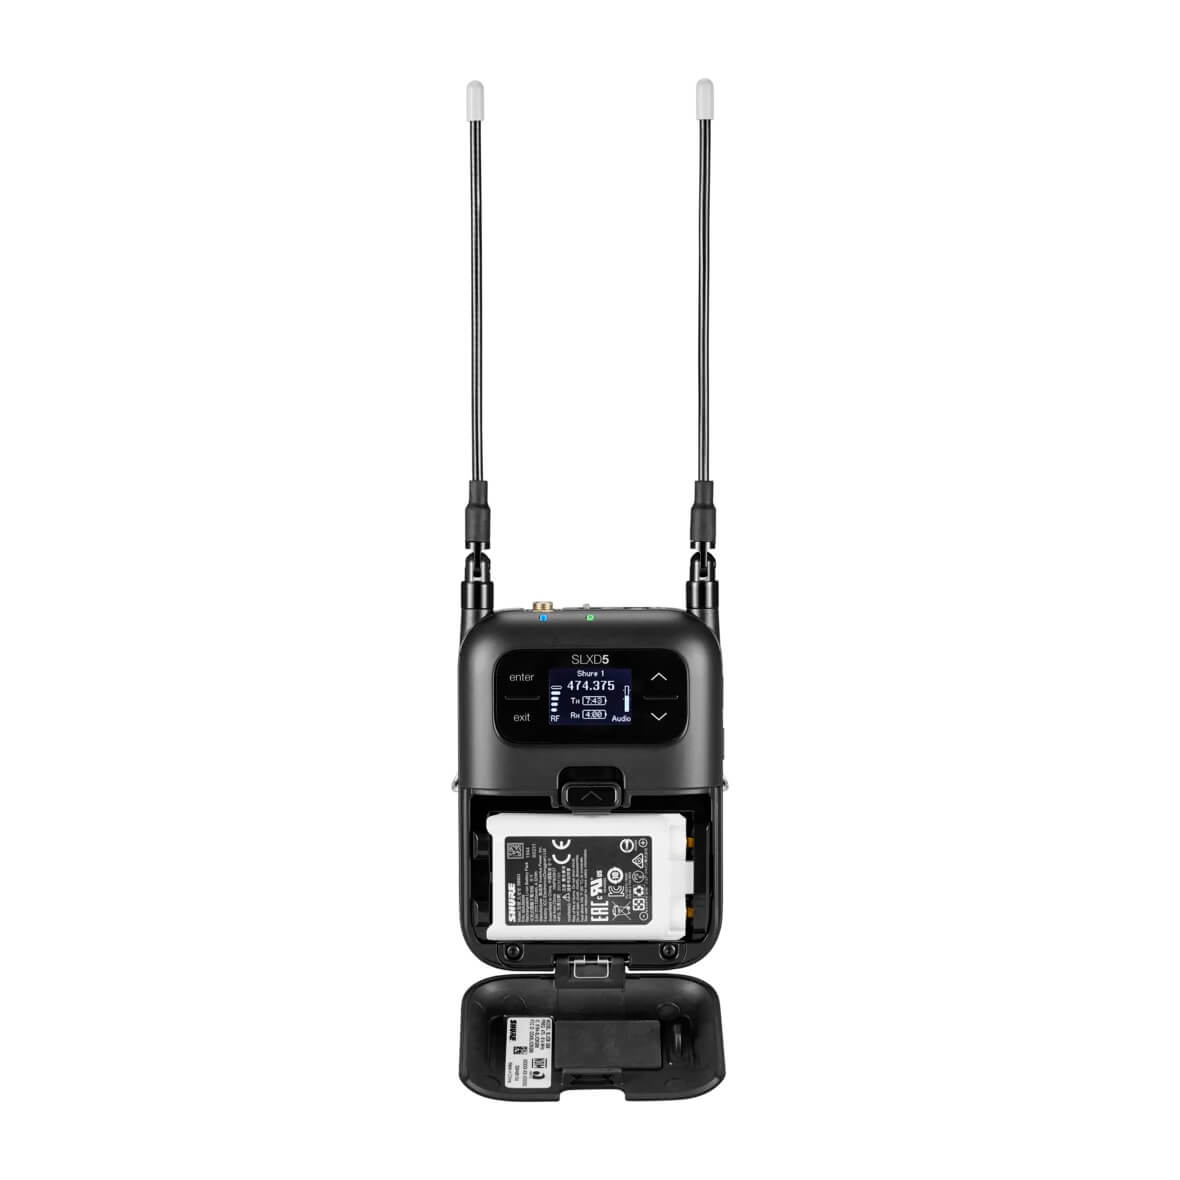 Shure SLXD5 - Portable Digital Wireless Receiver, shown with optional rechargeable battery